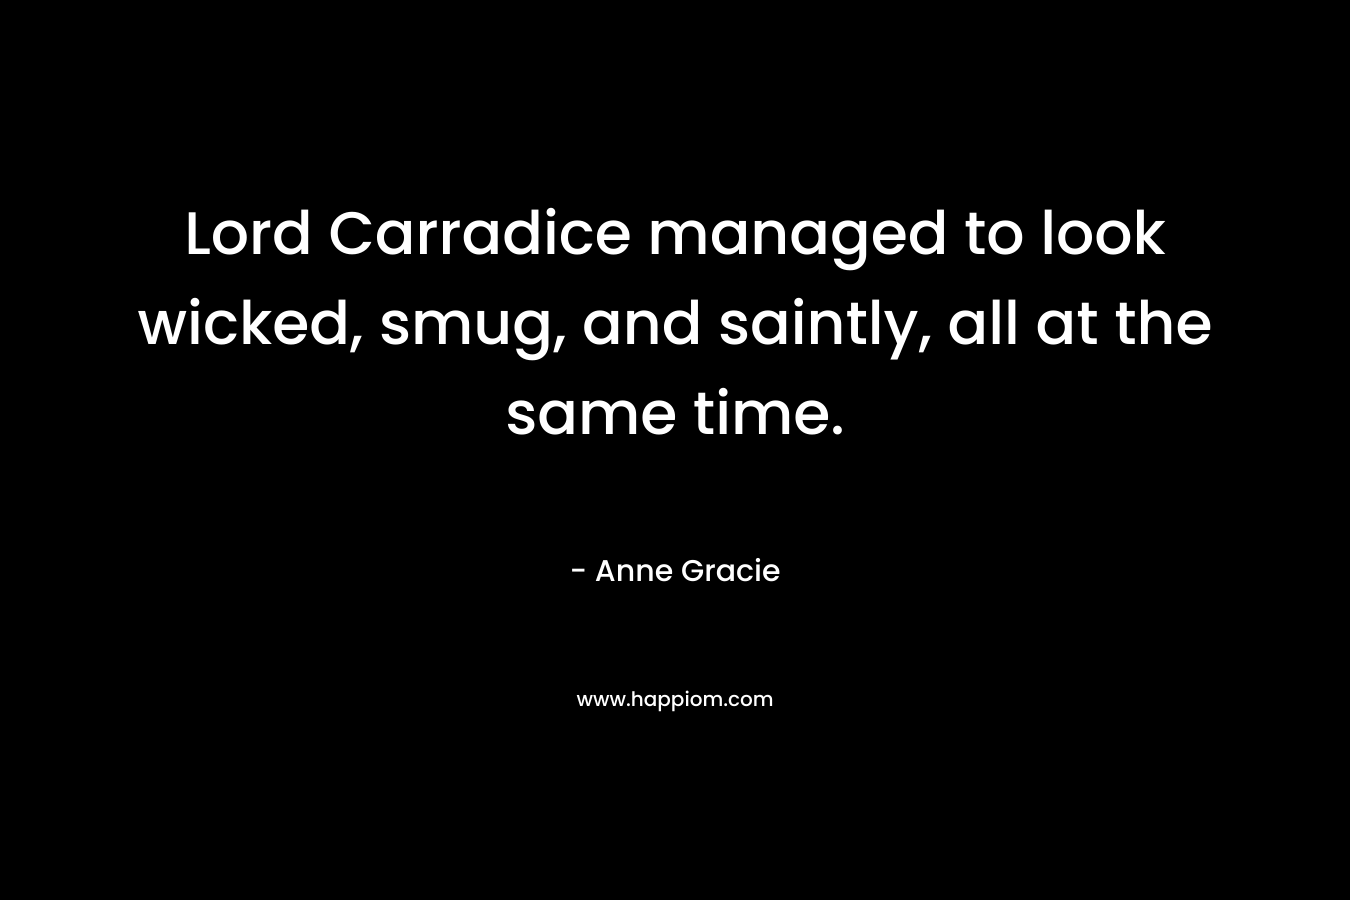 Lord Carradice managed to look wicked, smug, and saintly, all at the same time. – Anne Gracie